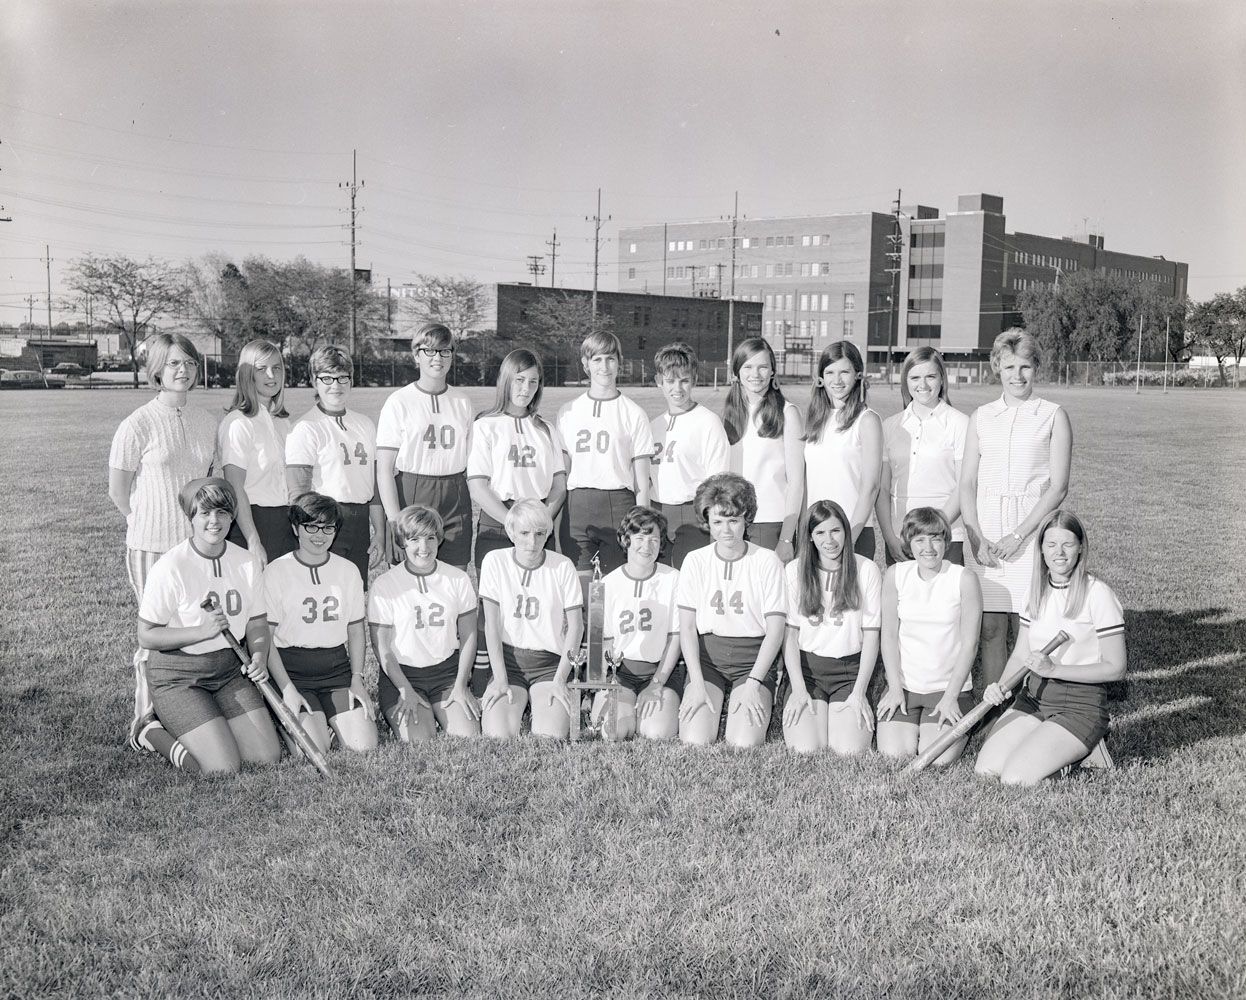 A black and white group portrait of a sports team